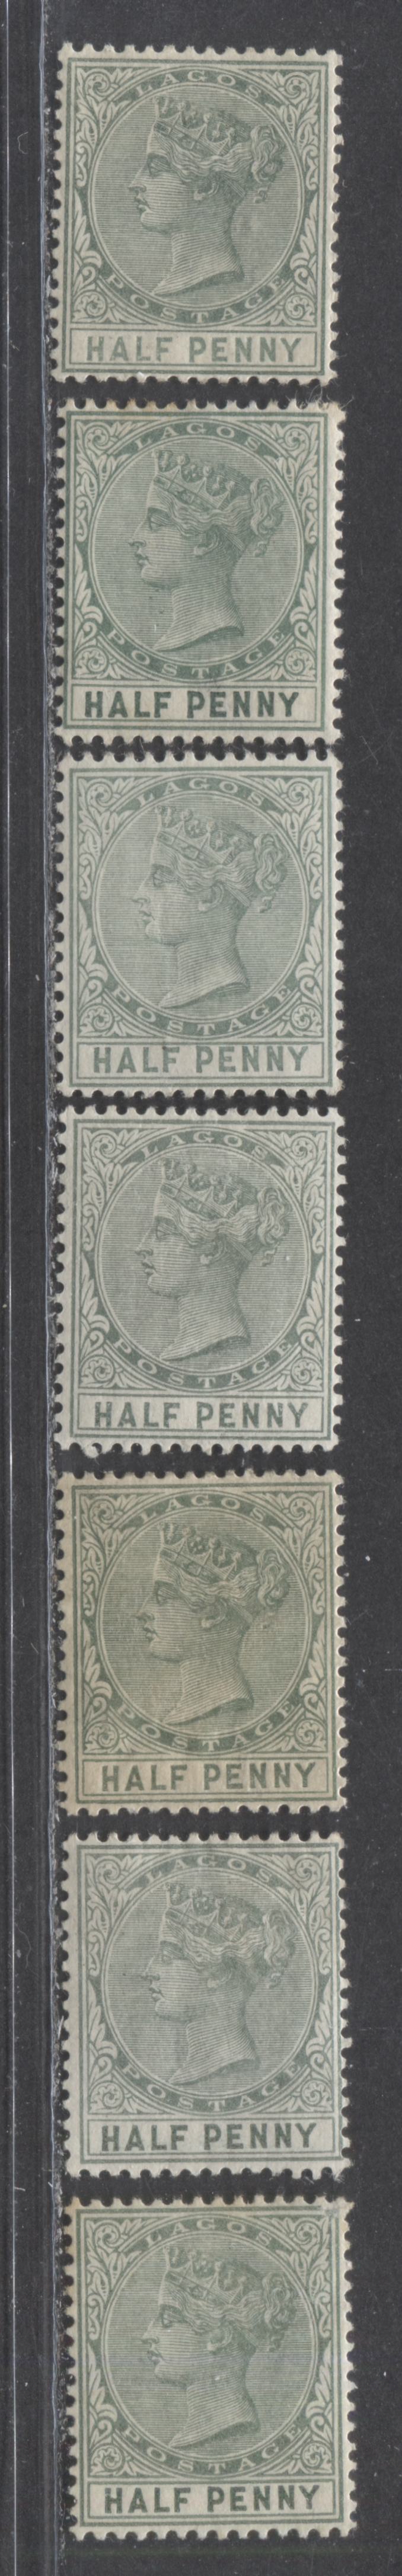 Lot 257 Lagos SG#21 (SC#13) 1/2d Green, Queen Victoria, 1884-1886 Second Crown CA Watermarked Issue, A Mint Group of 7 Different Printings, Likely Between 1894 and 1898, 2022 Scott Classic Cat. $15.75 USD For the Commonest Printings